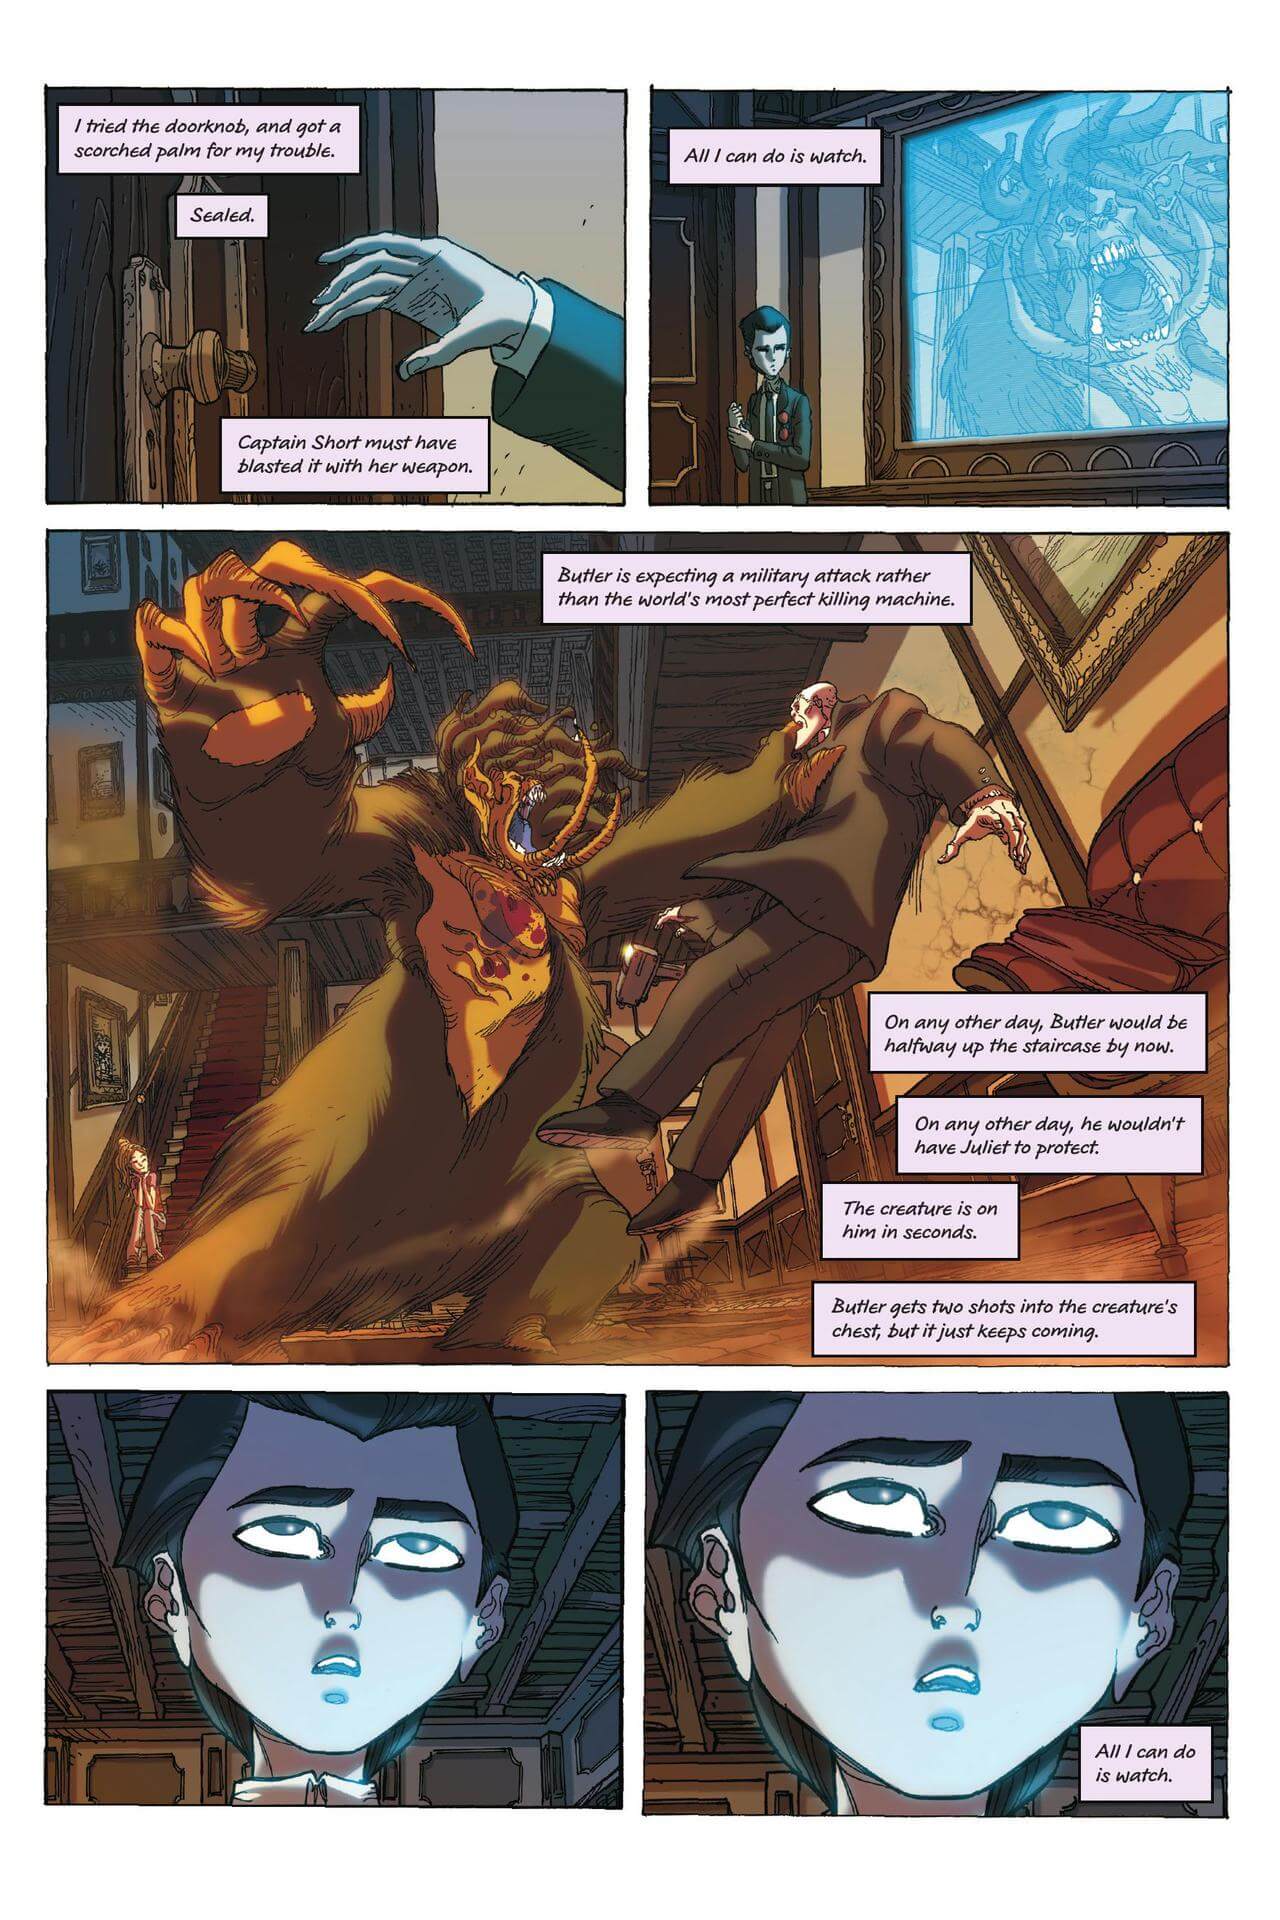 page 90 of artemis fowl the graphic novel